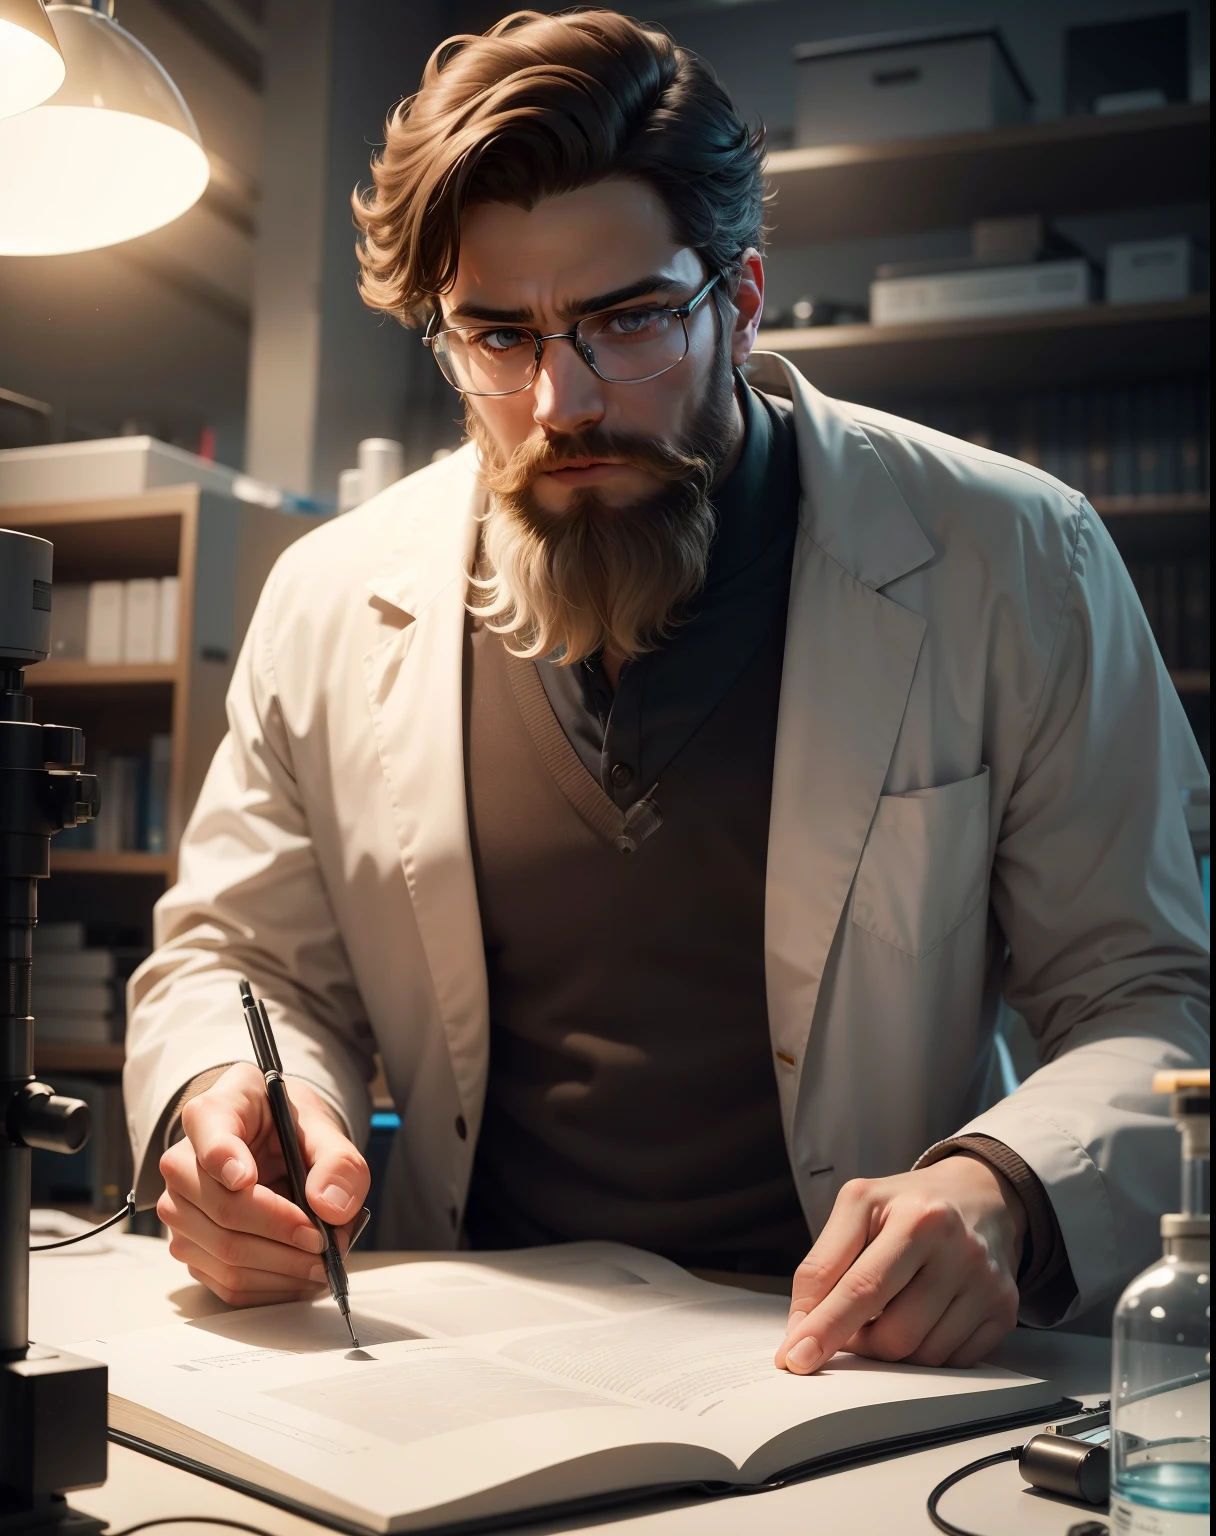 In the best quality image, a young scientist with a beard is captivated by the mysteries of the universe, working in a state-of-the-art laboratory. The scene is rendered in 4k, 8k, or high-resolution with a masterpiece level of detail (1.2). The Scientist's focused expression and pensive look are highlighted under the warm, realistic, or photorealistic (1.37) light of a lamp. Deep of field.

The background reveals a modern and well-equipped setup filled with lab equipment, experiments, and a multitude of scientific papers and journals neatly stacked on shelves. The scientist is wearing a white coat